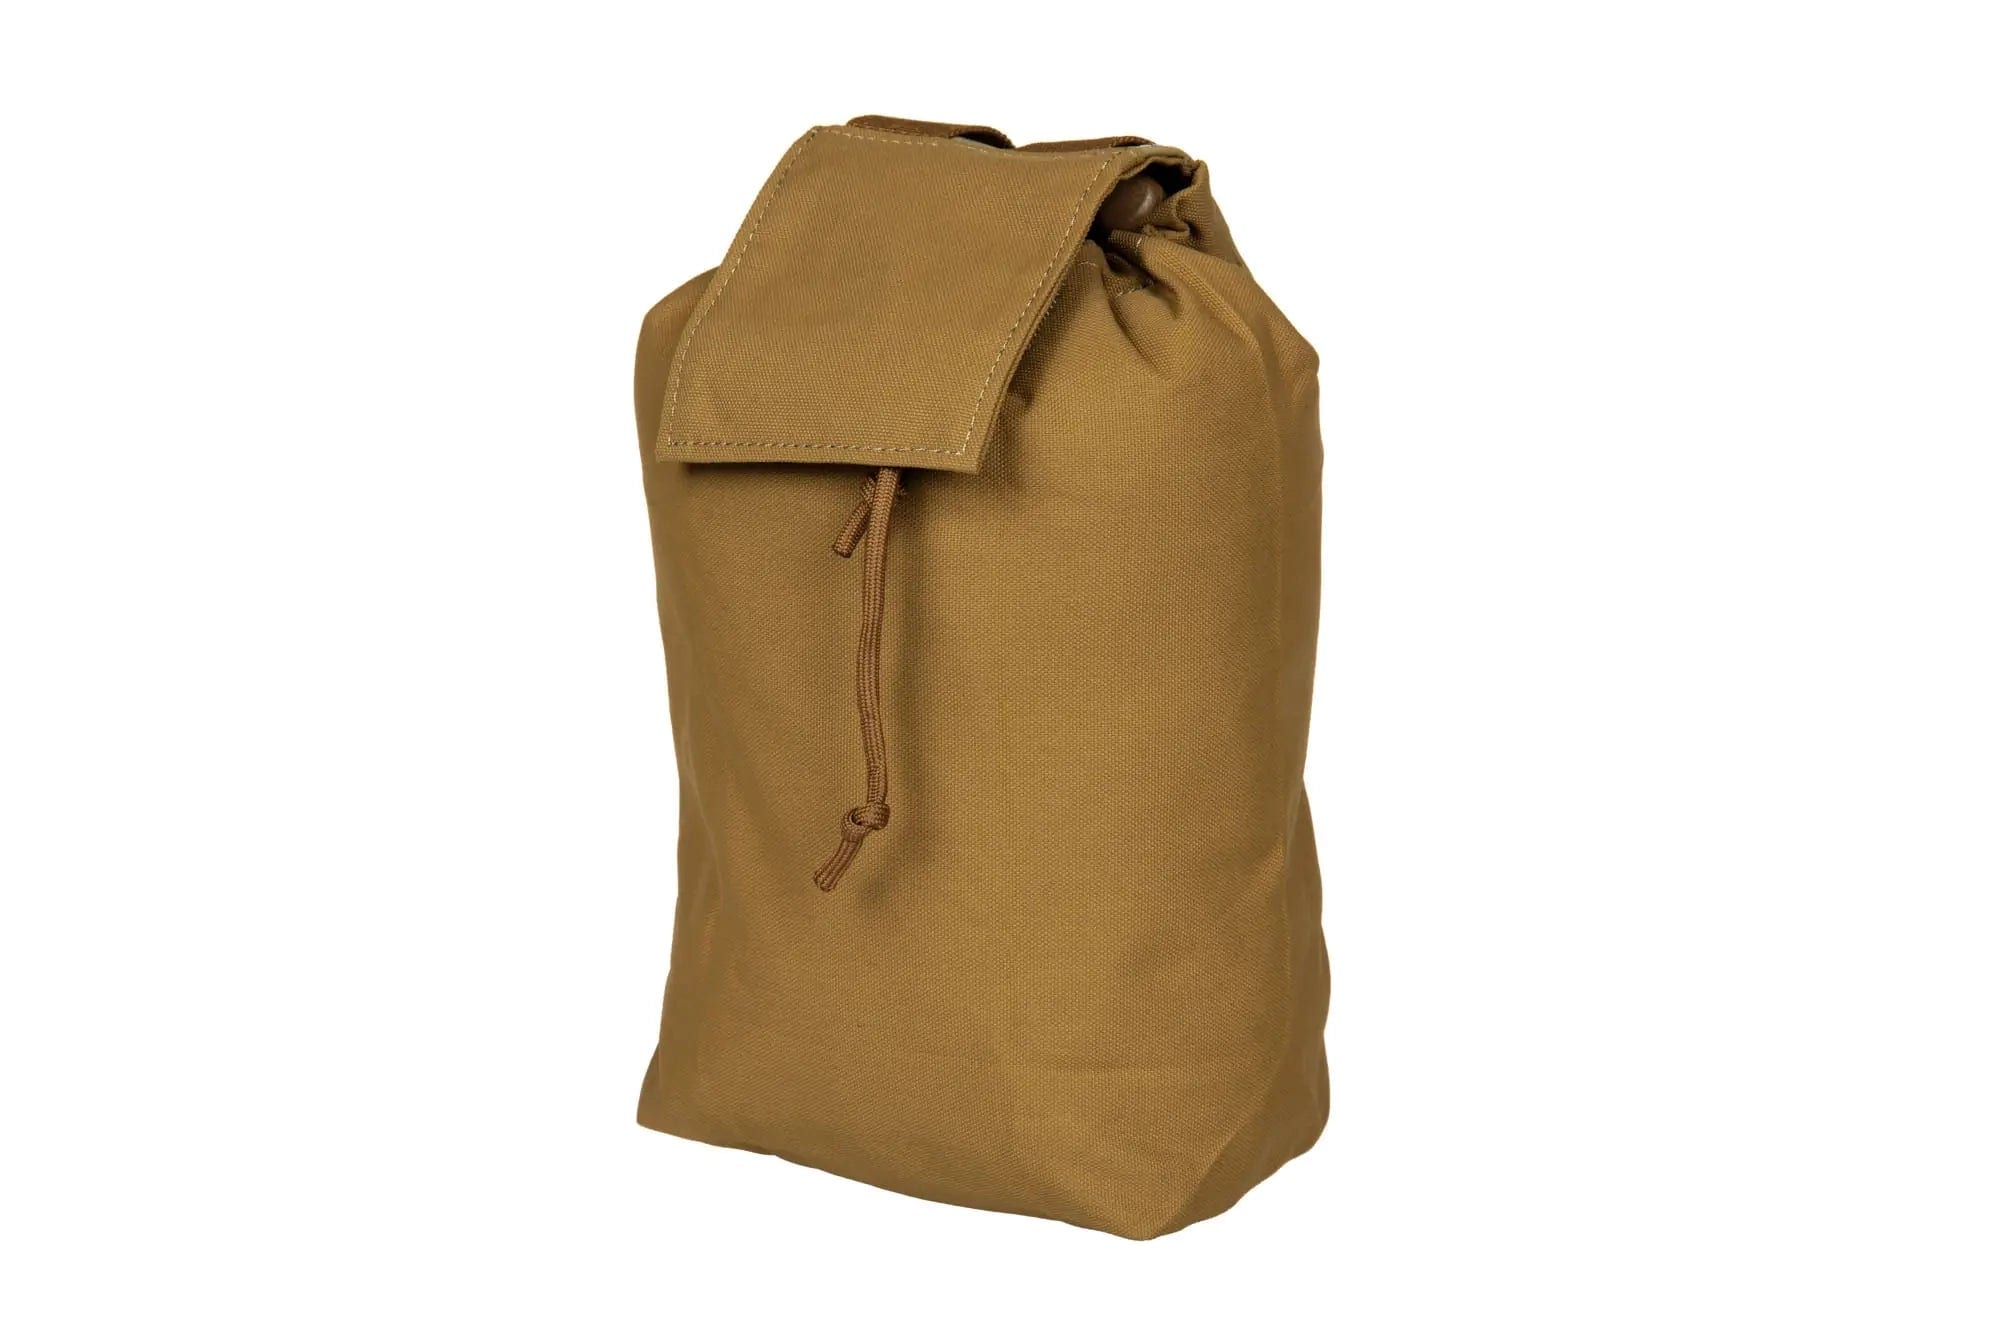 MINI Foldable Magdump pouch Coyote